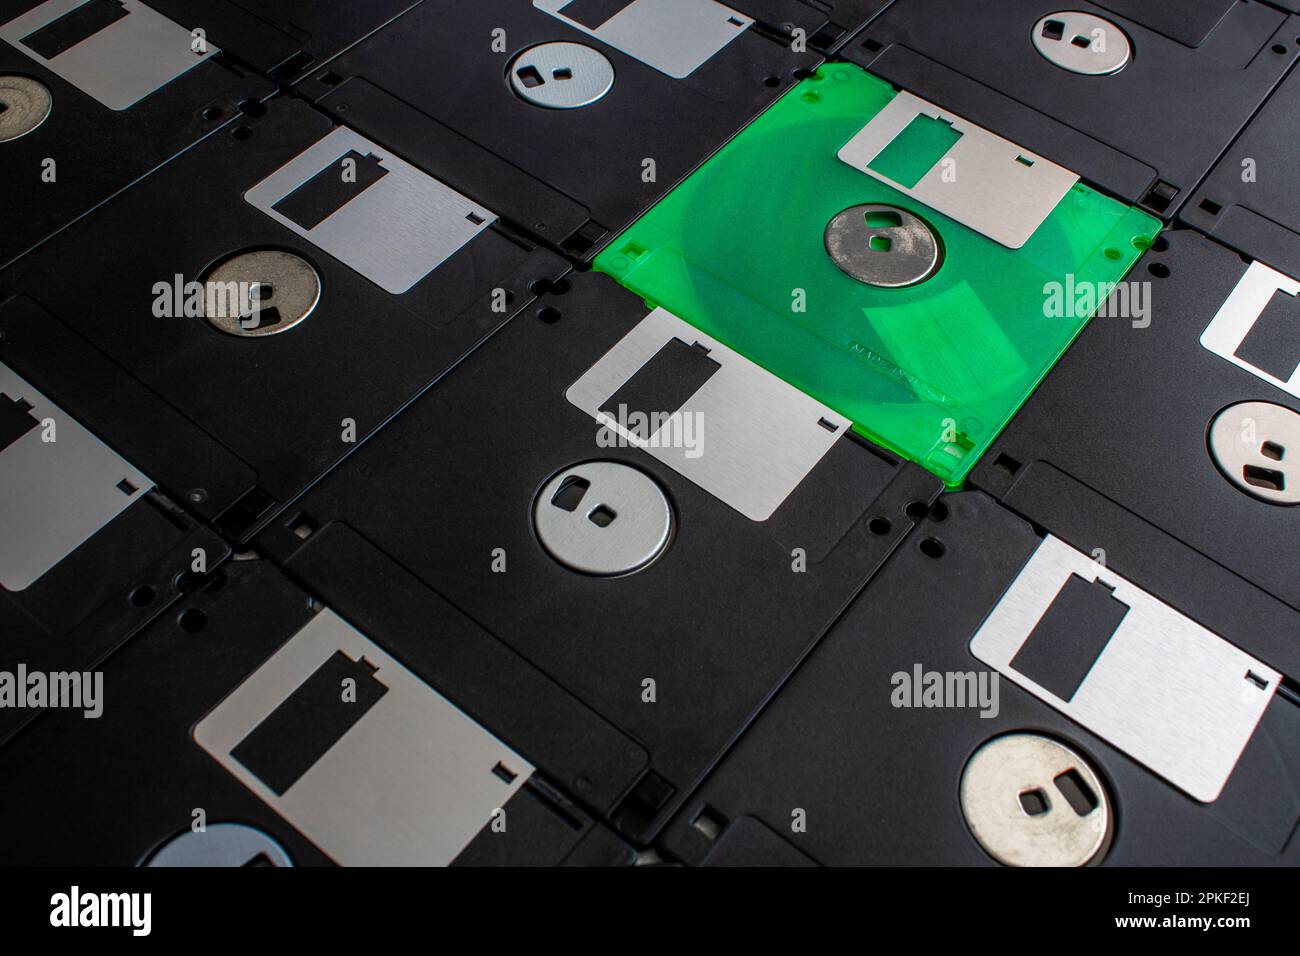 old diskette 3.5 or floppy disk, floppy disk drive, magnetic storage unit Stock Photo